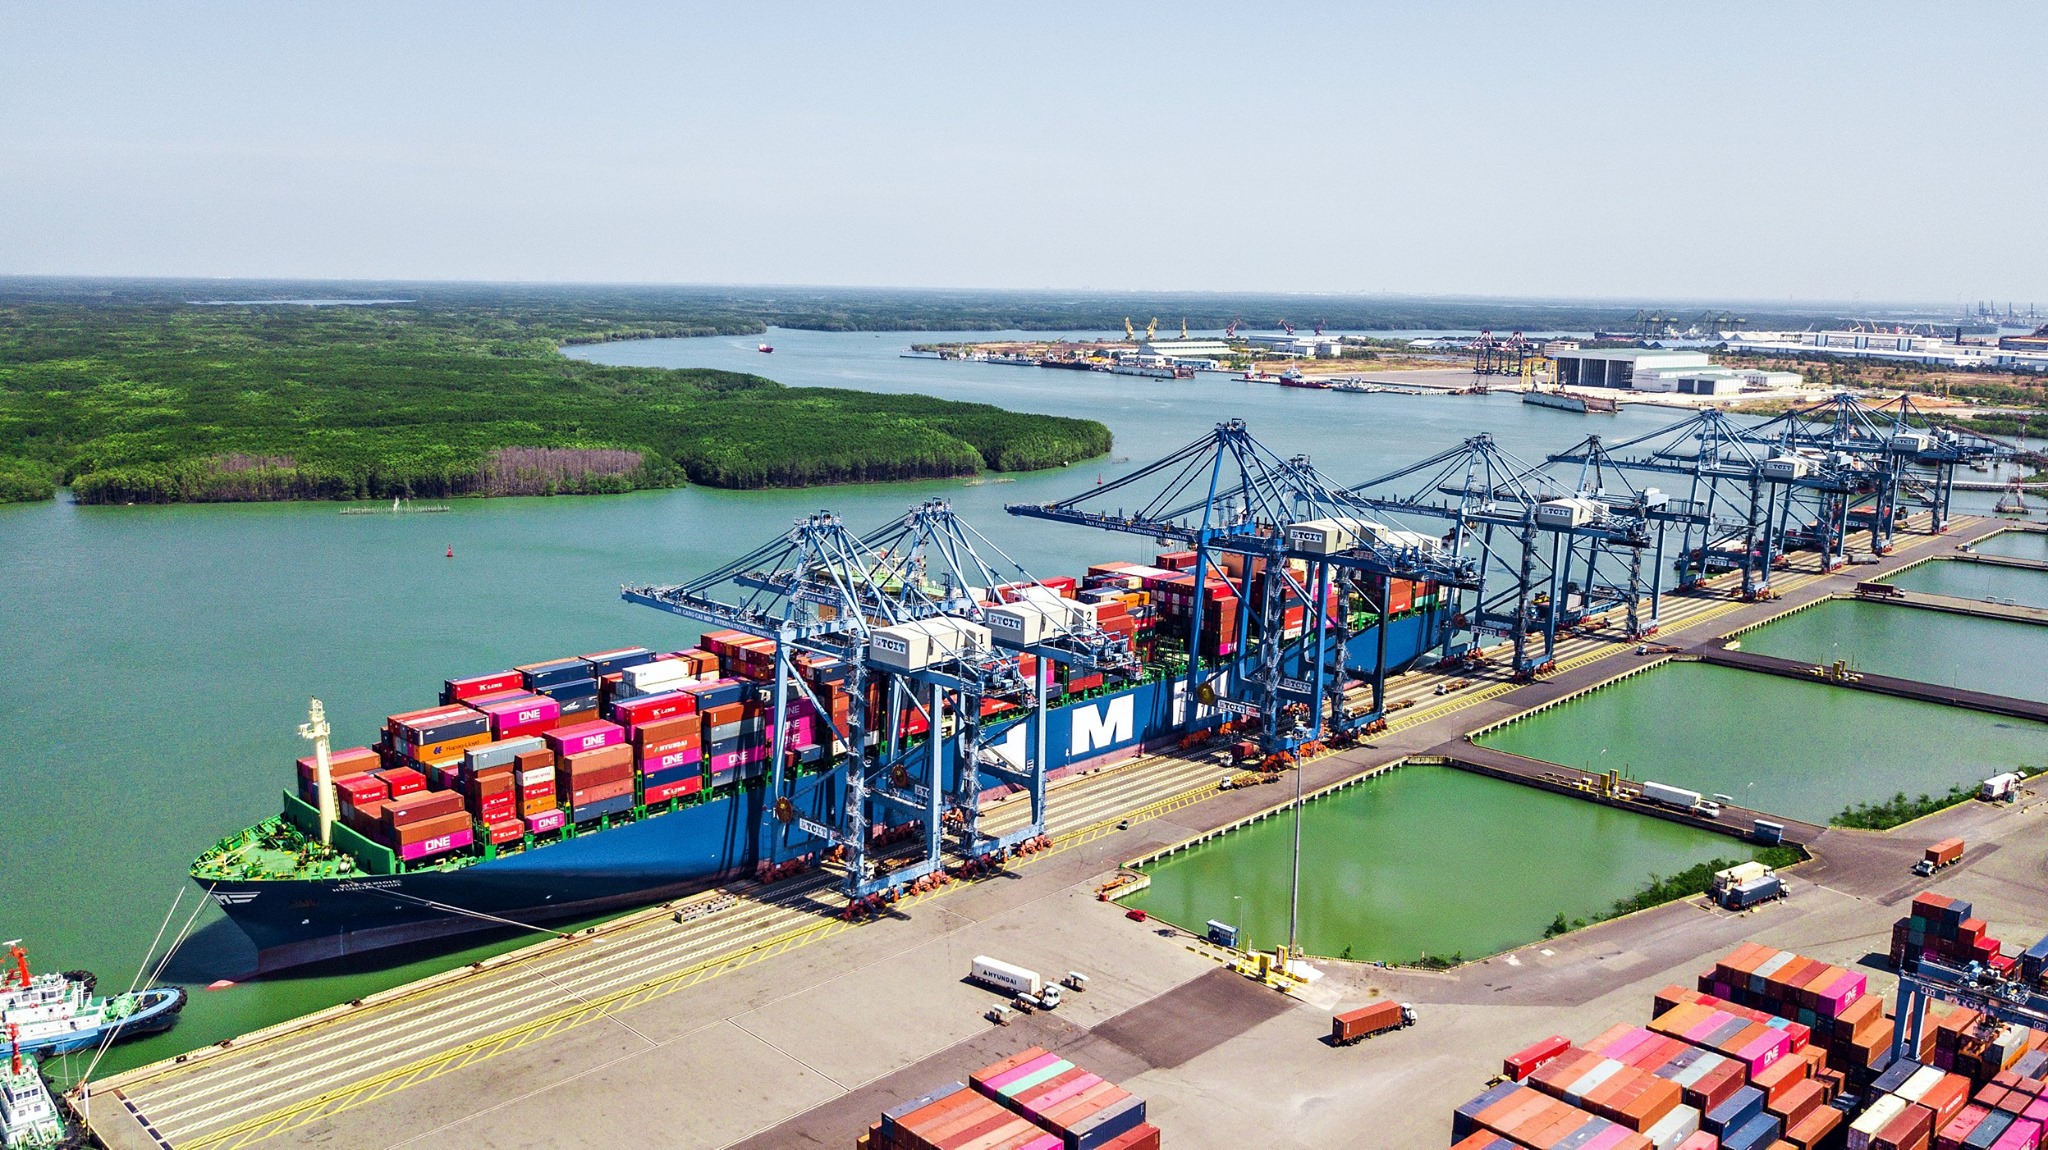 TCIT WELCOMES HUYNDAI PRIDE - HMM BIGGEST CONTAINER VESSEL TO EVER CALL VIETNAM